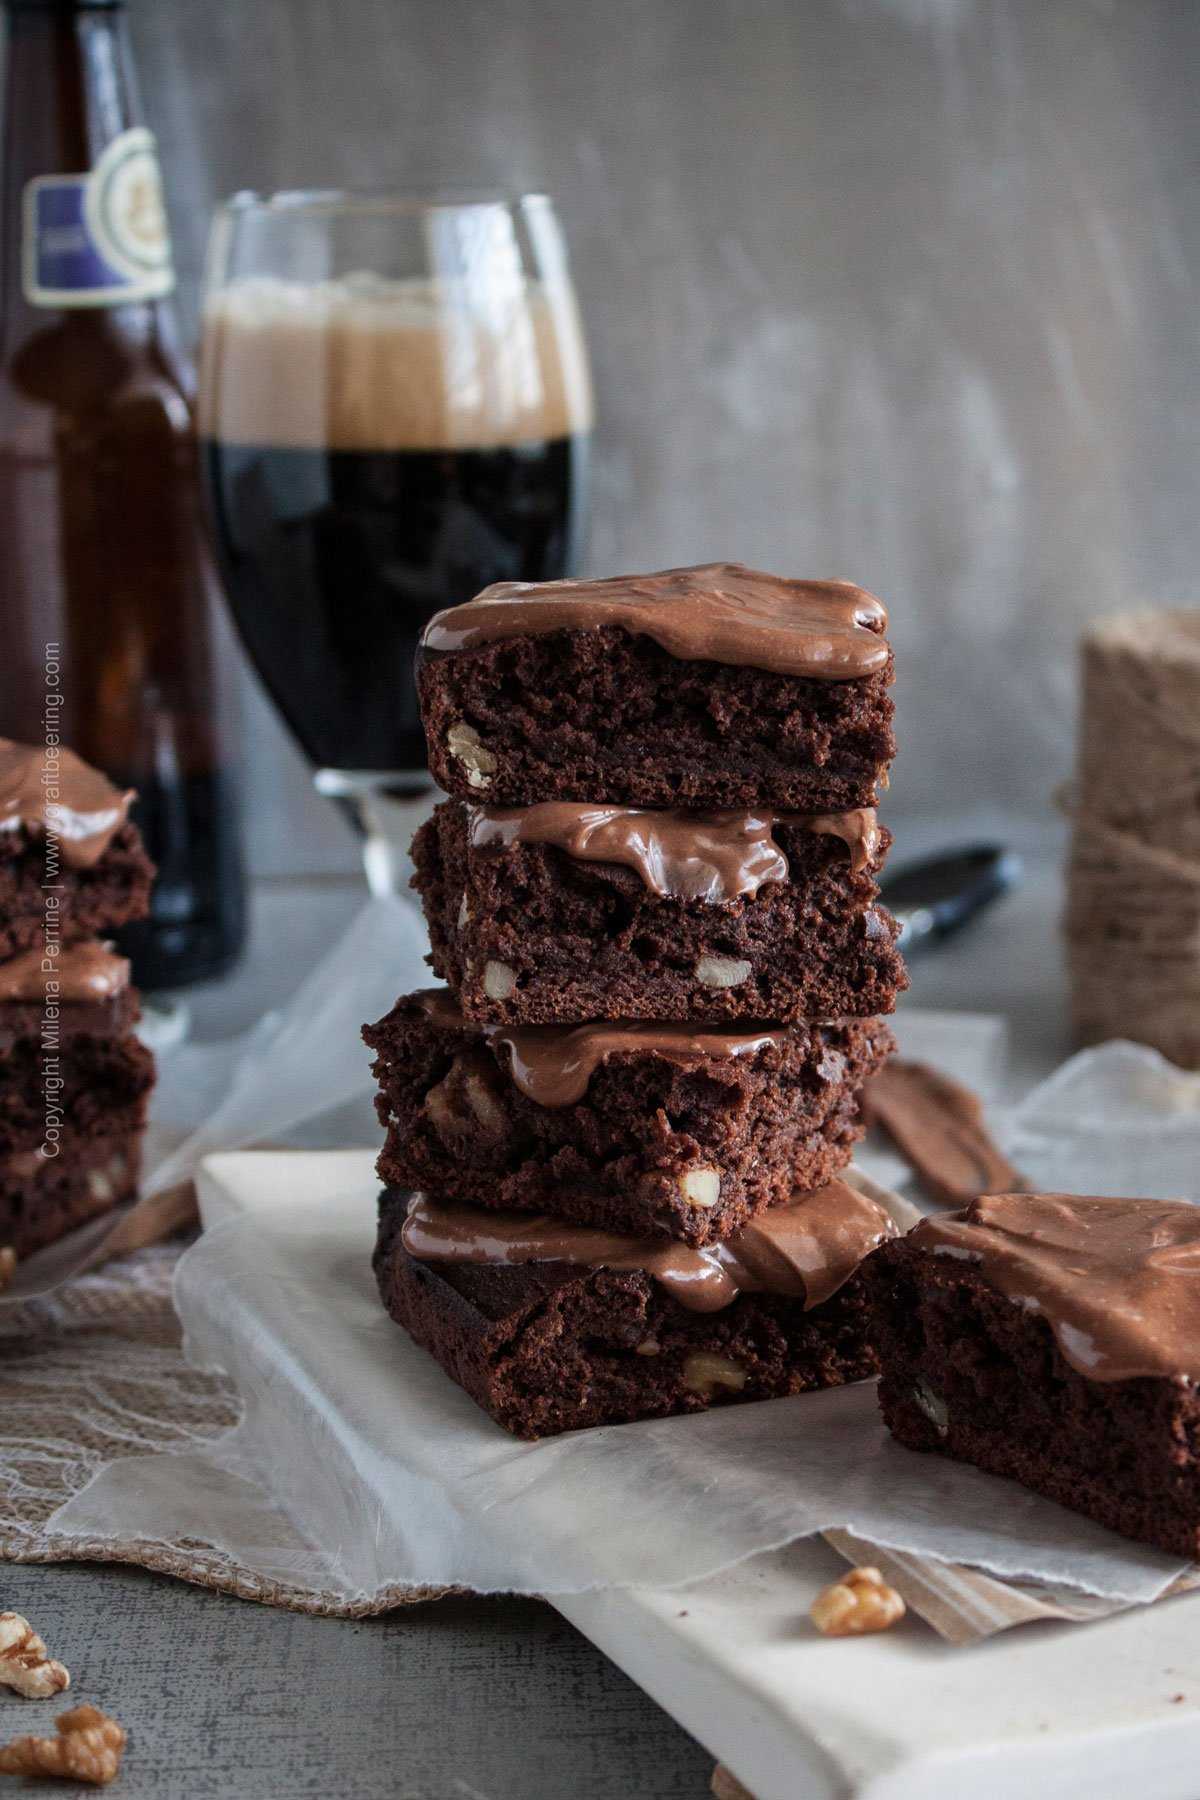 Beer brownies with stout and walnuts. #stoutbrownies #beerbrownies